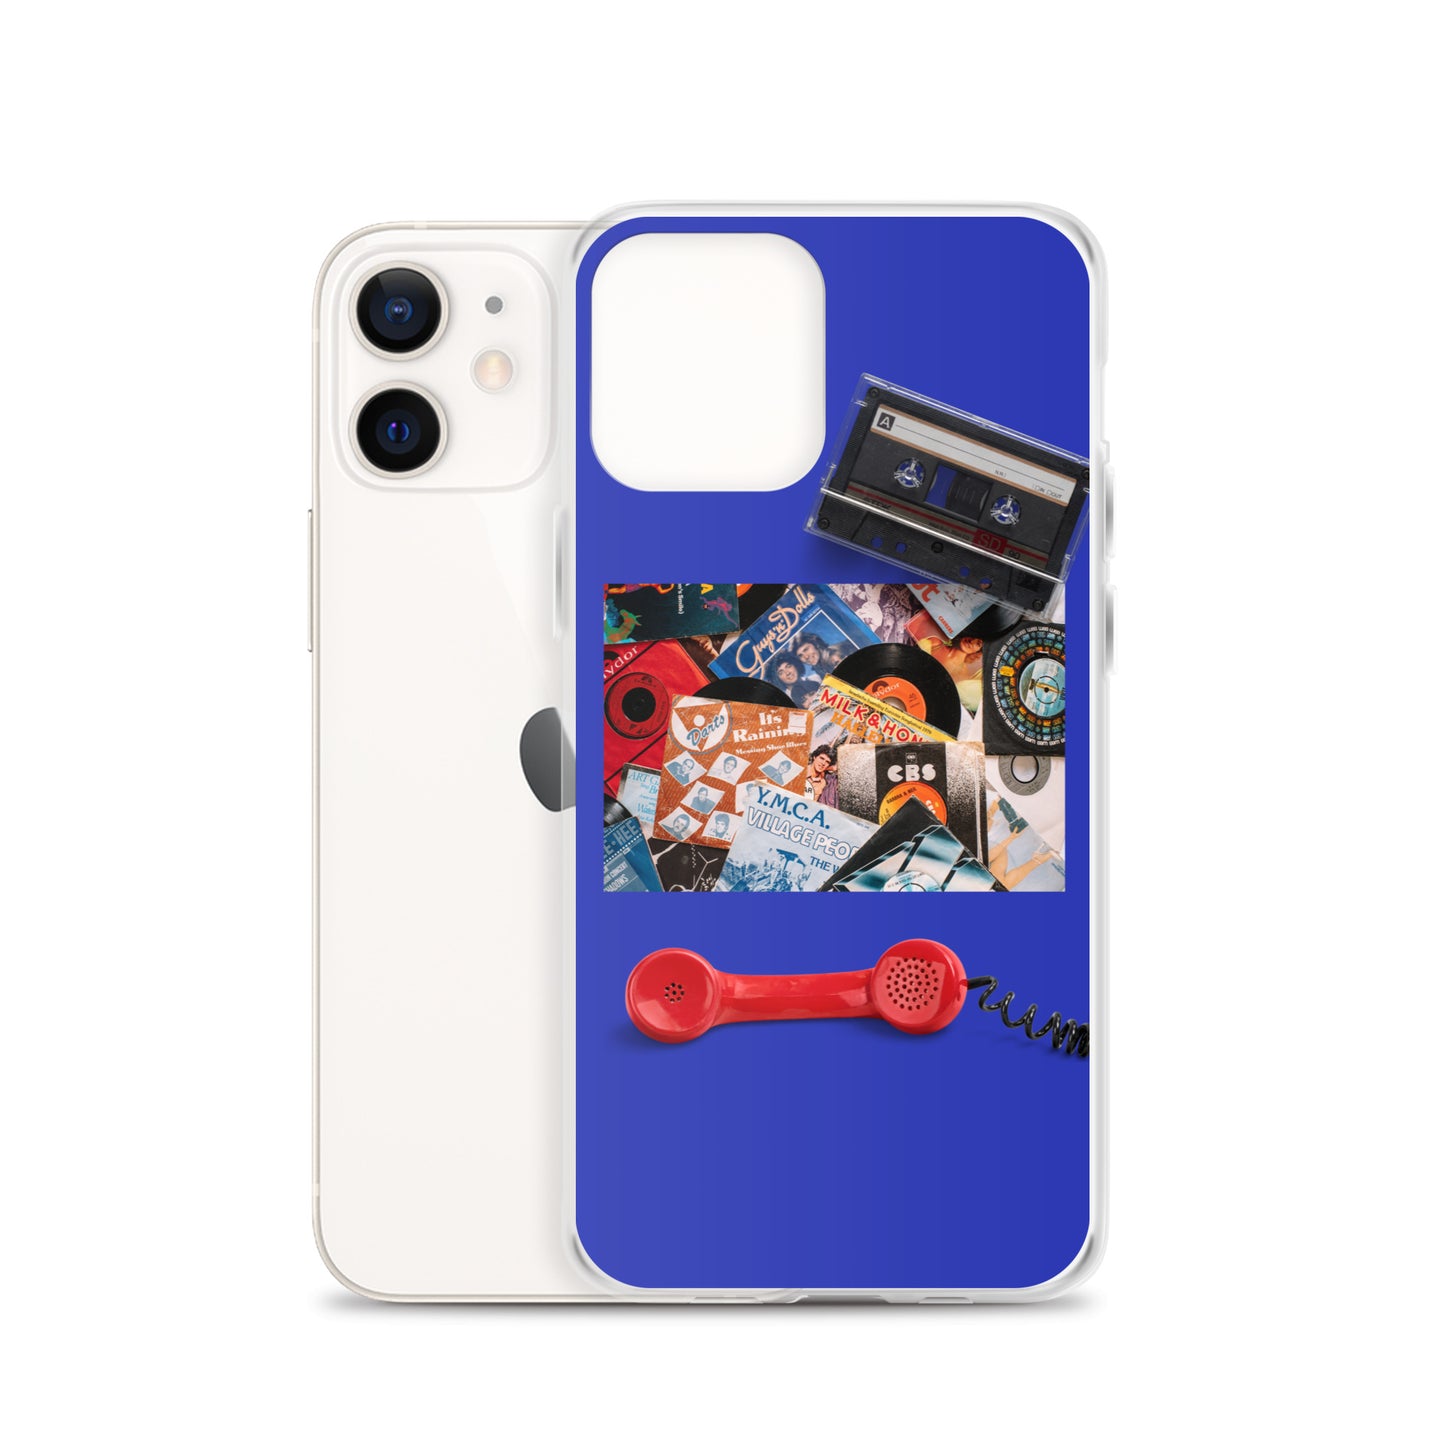 Red Telephone iPhone Case